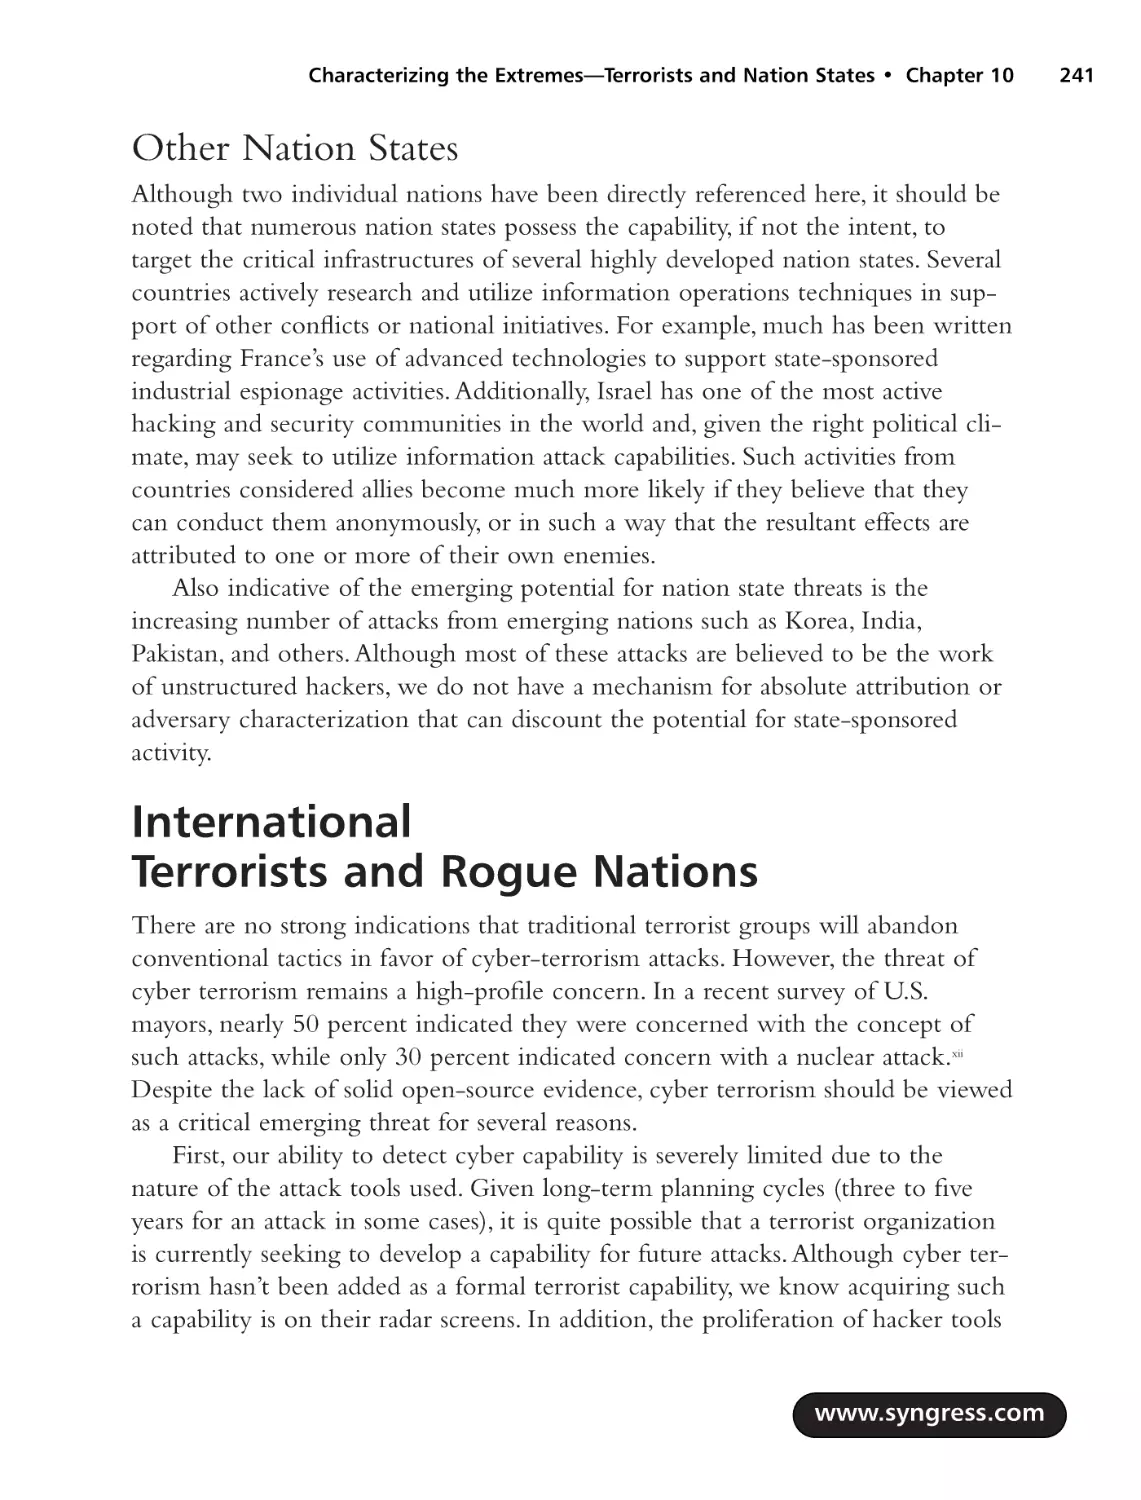 Other Nation States
International Terrorists and Rogue Nations